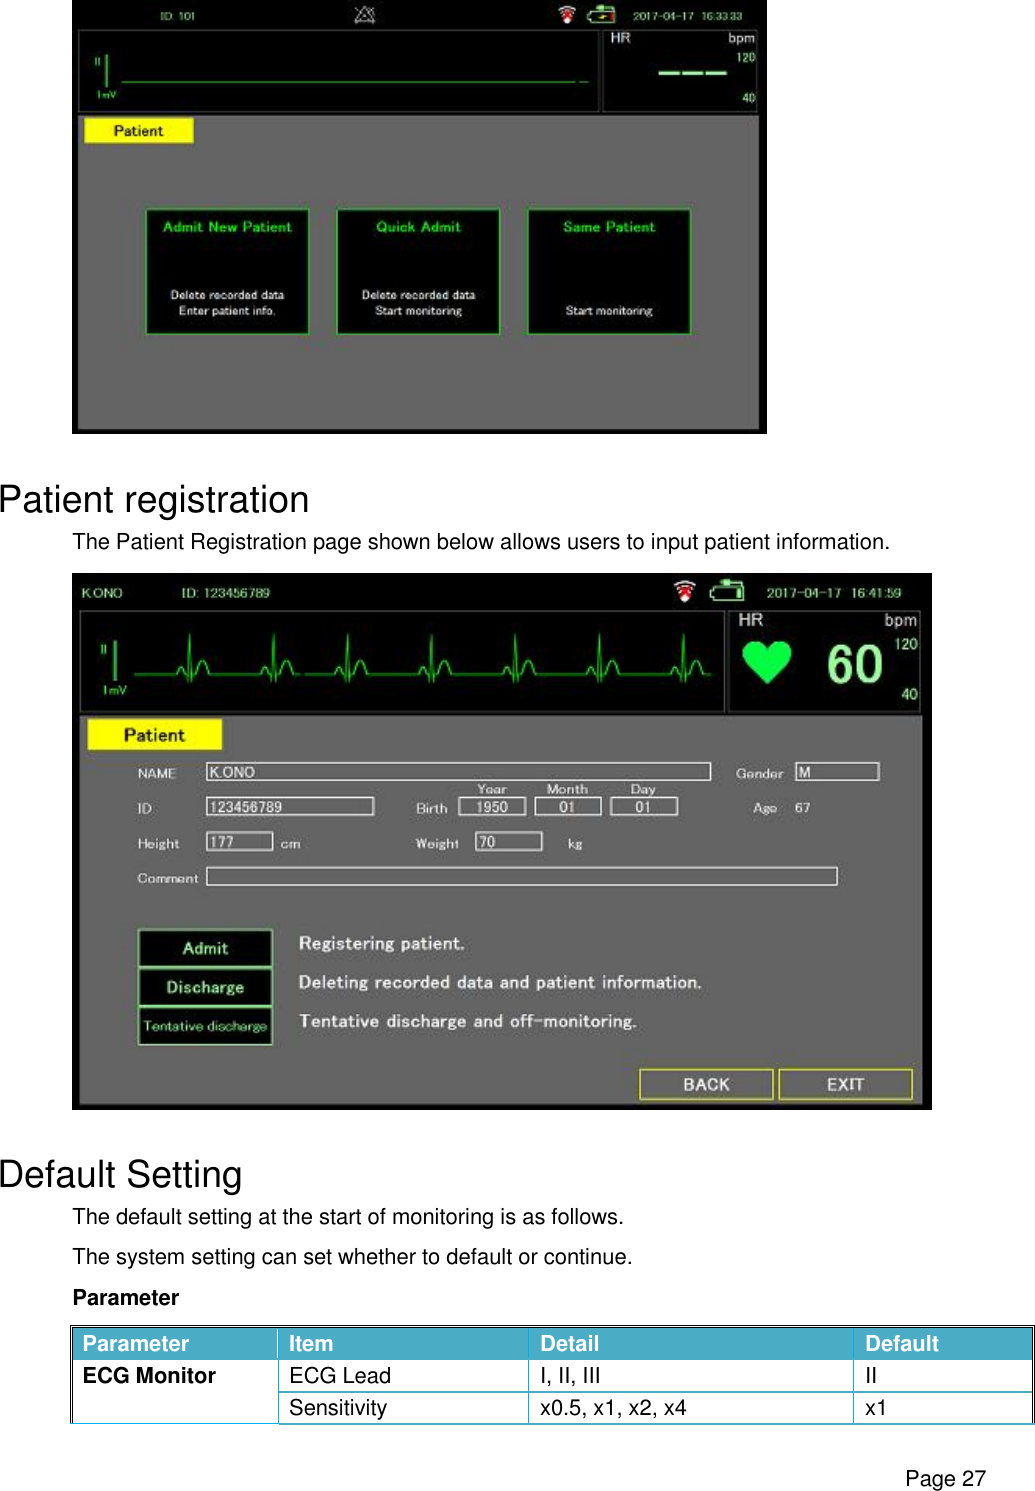      Page 27  Patient registration The Patient Registration page shown below allows users to input patient information.     Default Setting The default setting at the start of monitoring is as follows. The system setting can set whether to default or continue. Parameter Parameter  Item  Detail  Default ECG Monitor  ECG Lead  I, II, III  II Sensitivity  x0.5, x1, x2, x4  x1 